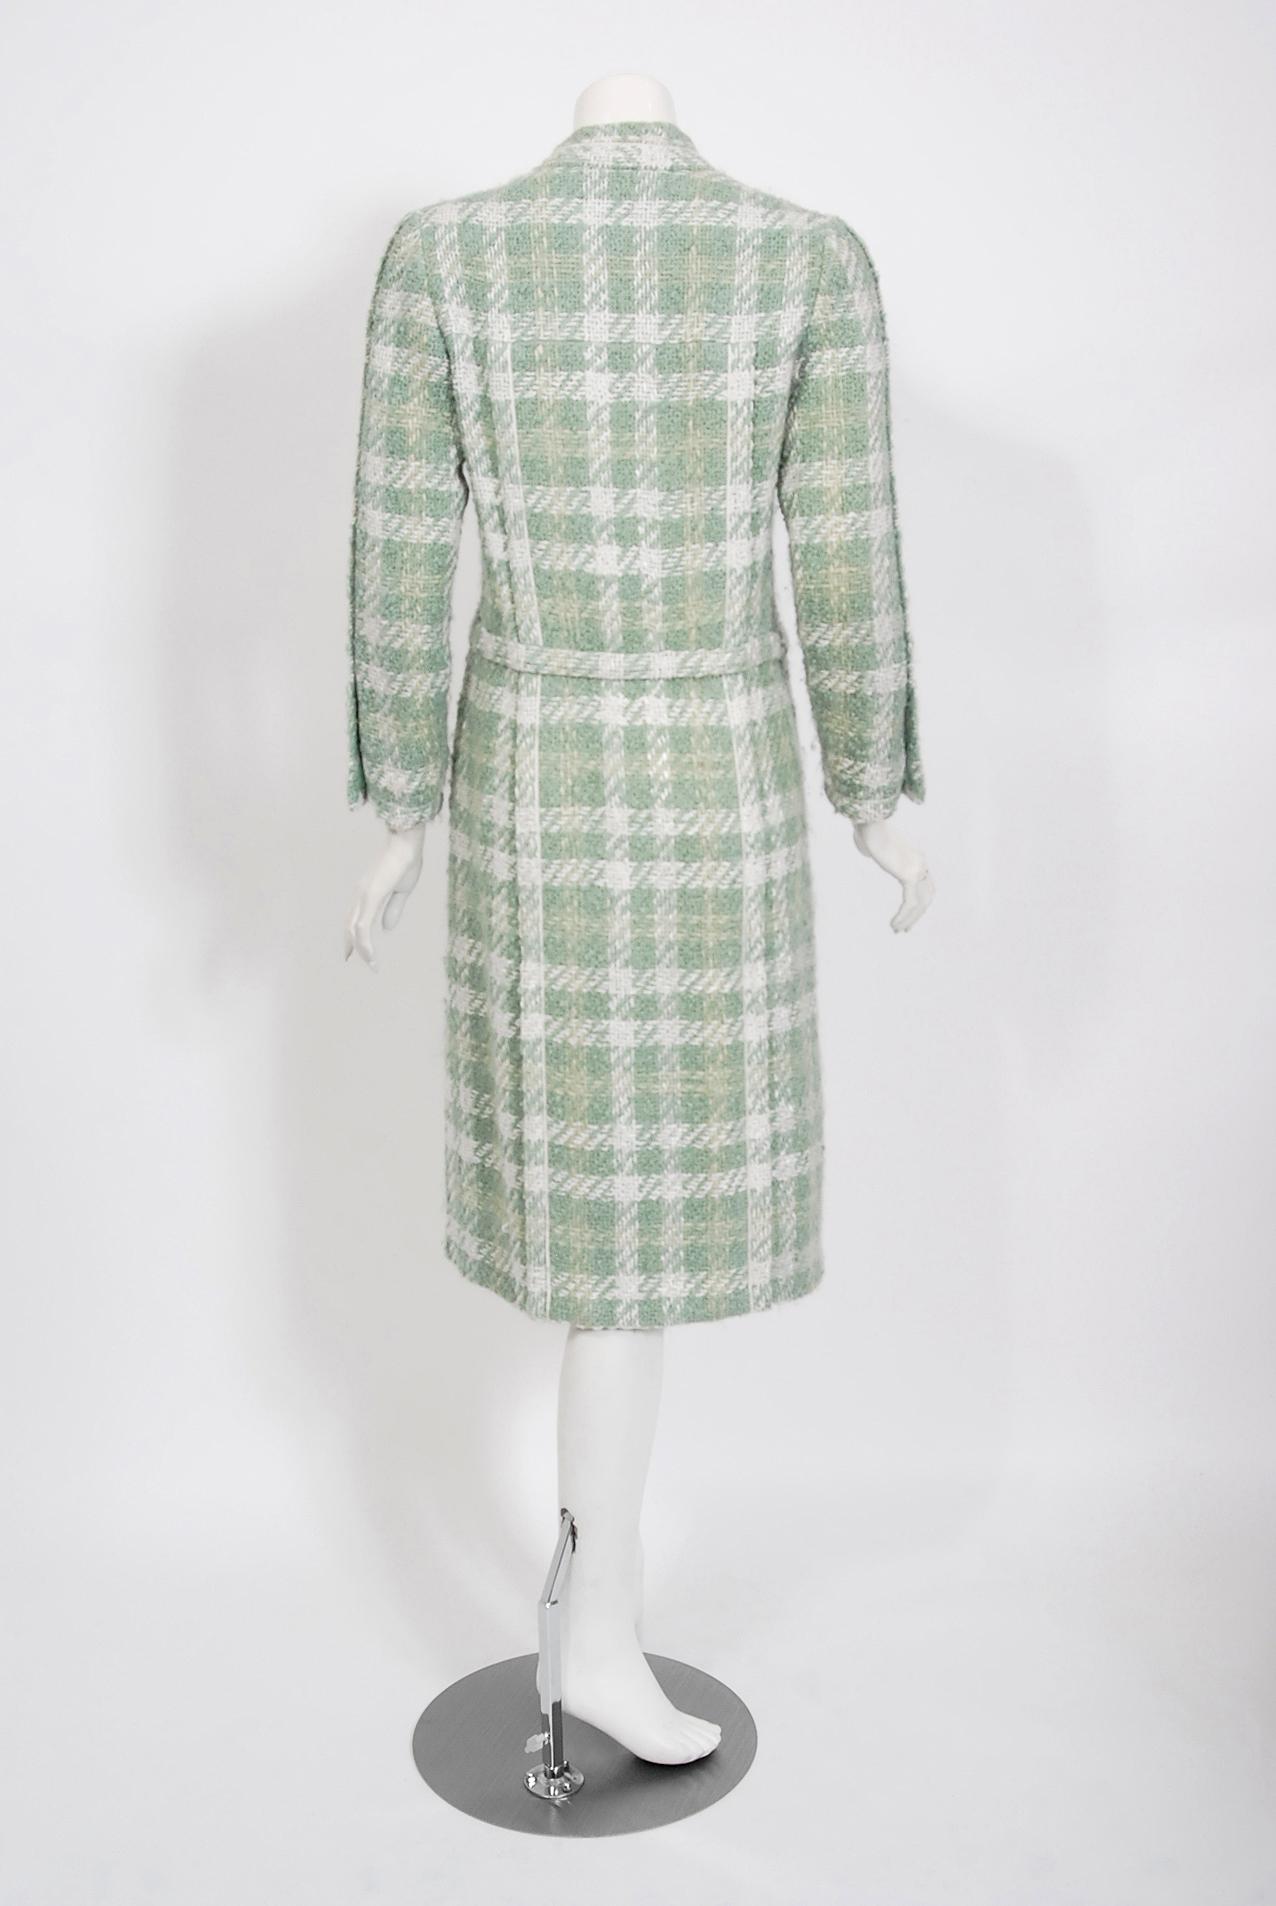 1973 Chanel Haute Couture Documented Seafoam Green Boucle Plaid Wool Coat  1